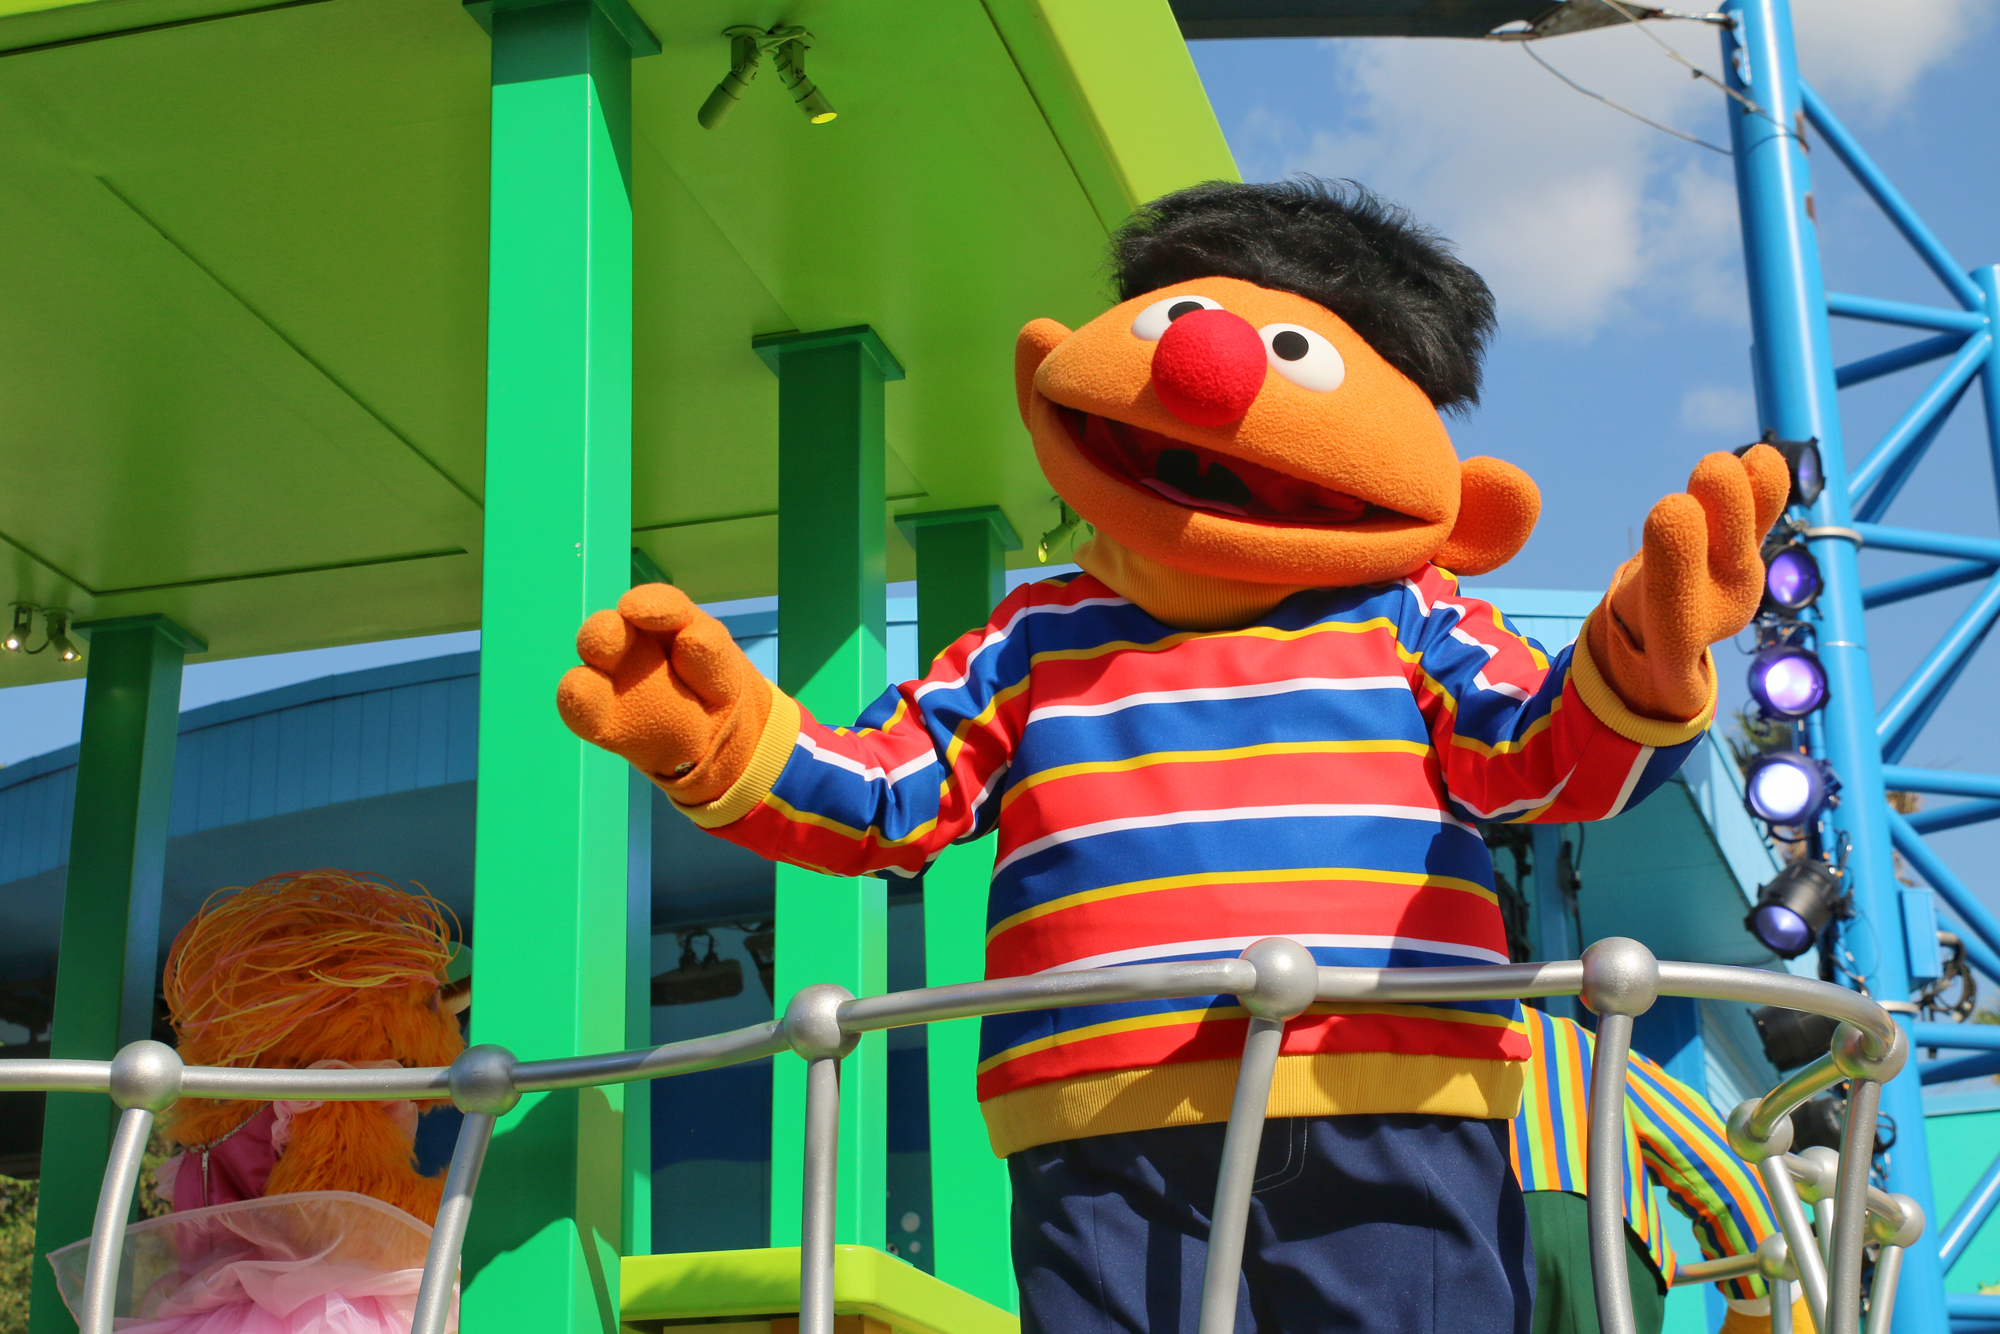 Ernie on parade float at SeaWorld